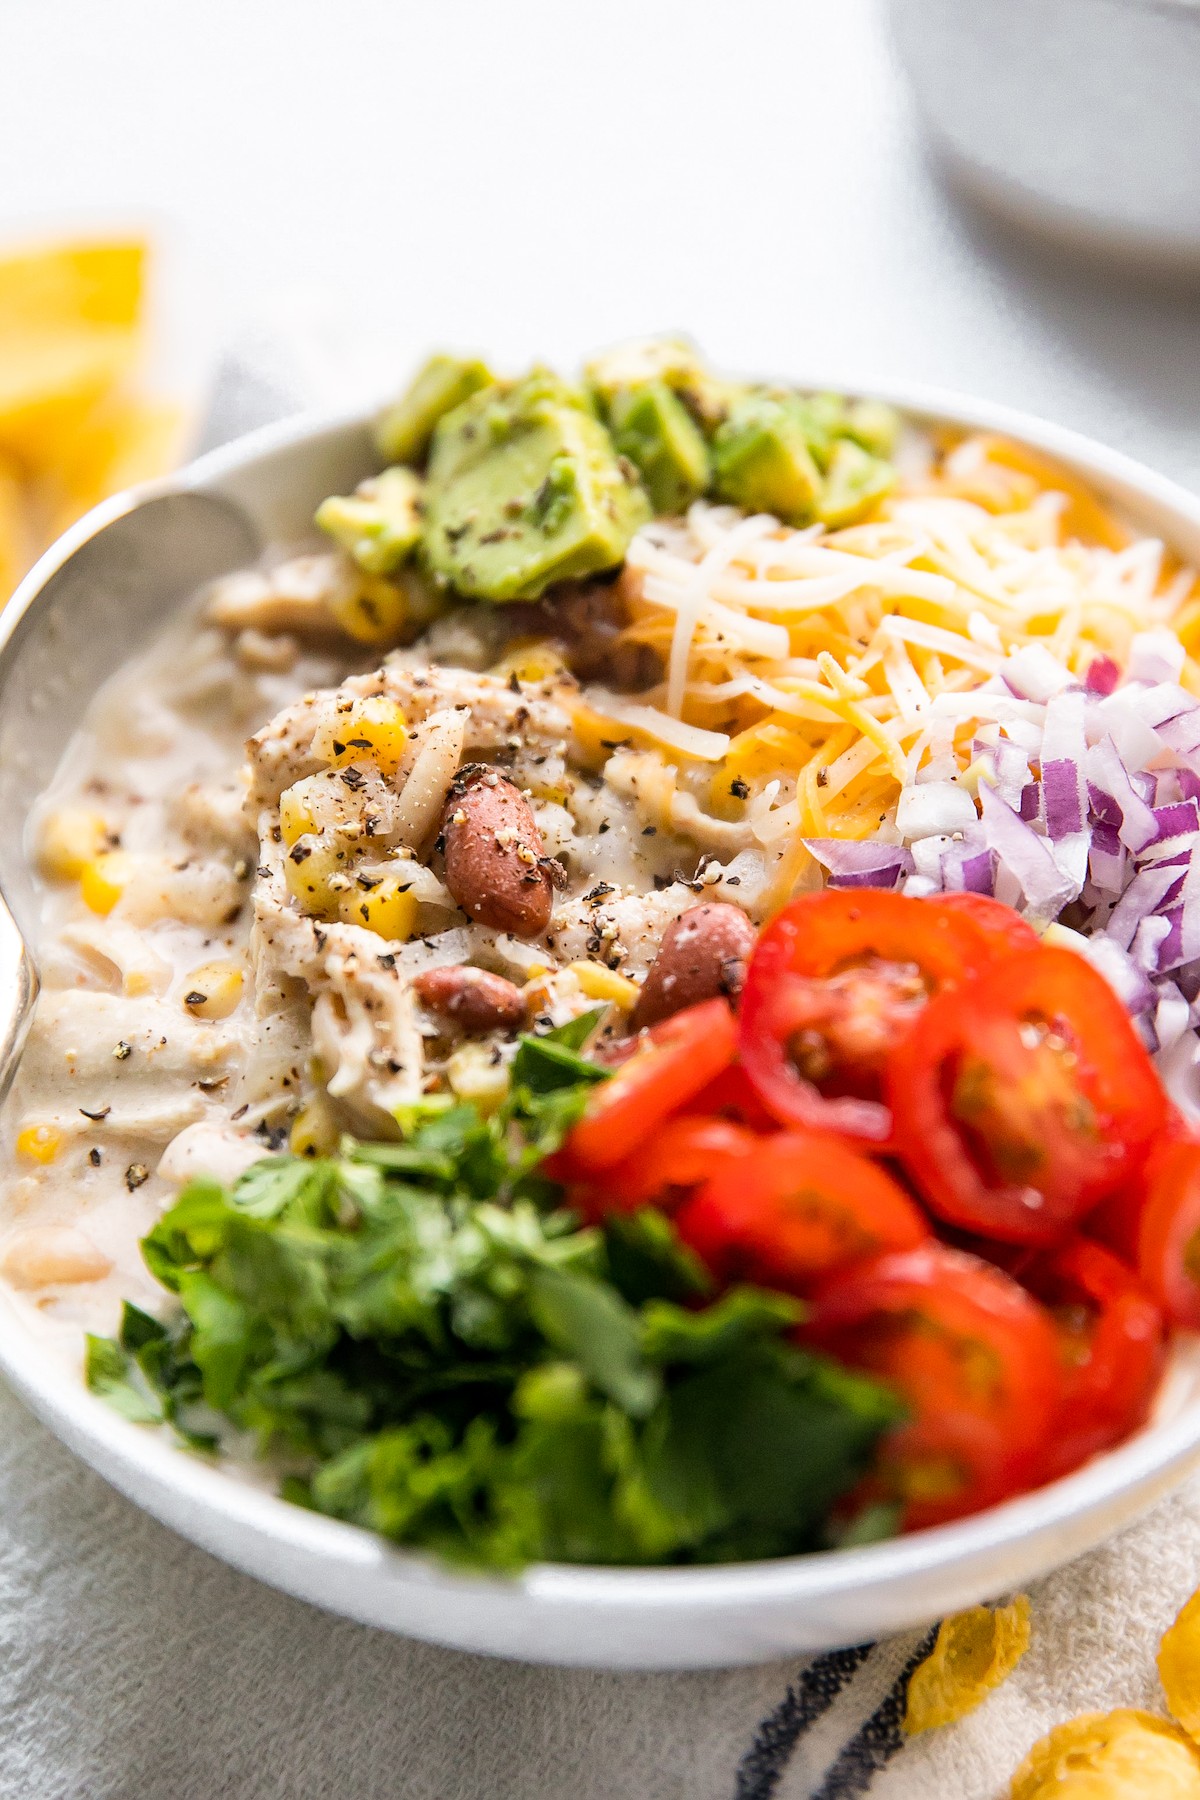 Slow cooker white chicken chili with colorful toppings arranged in the bowl.